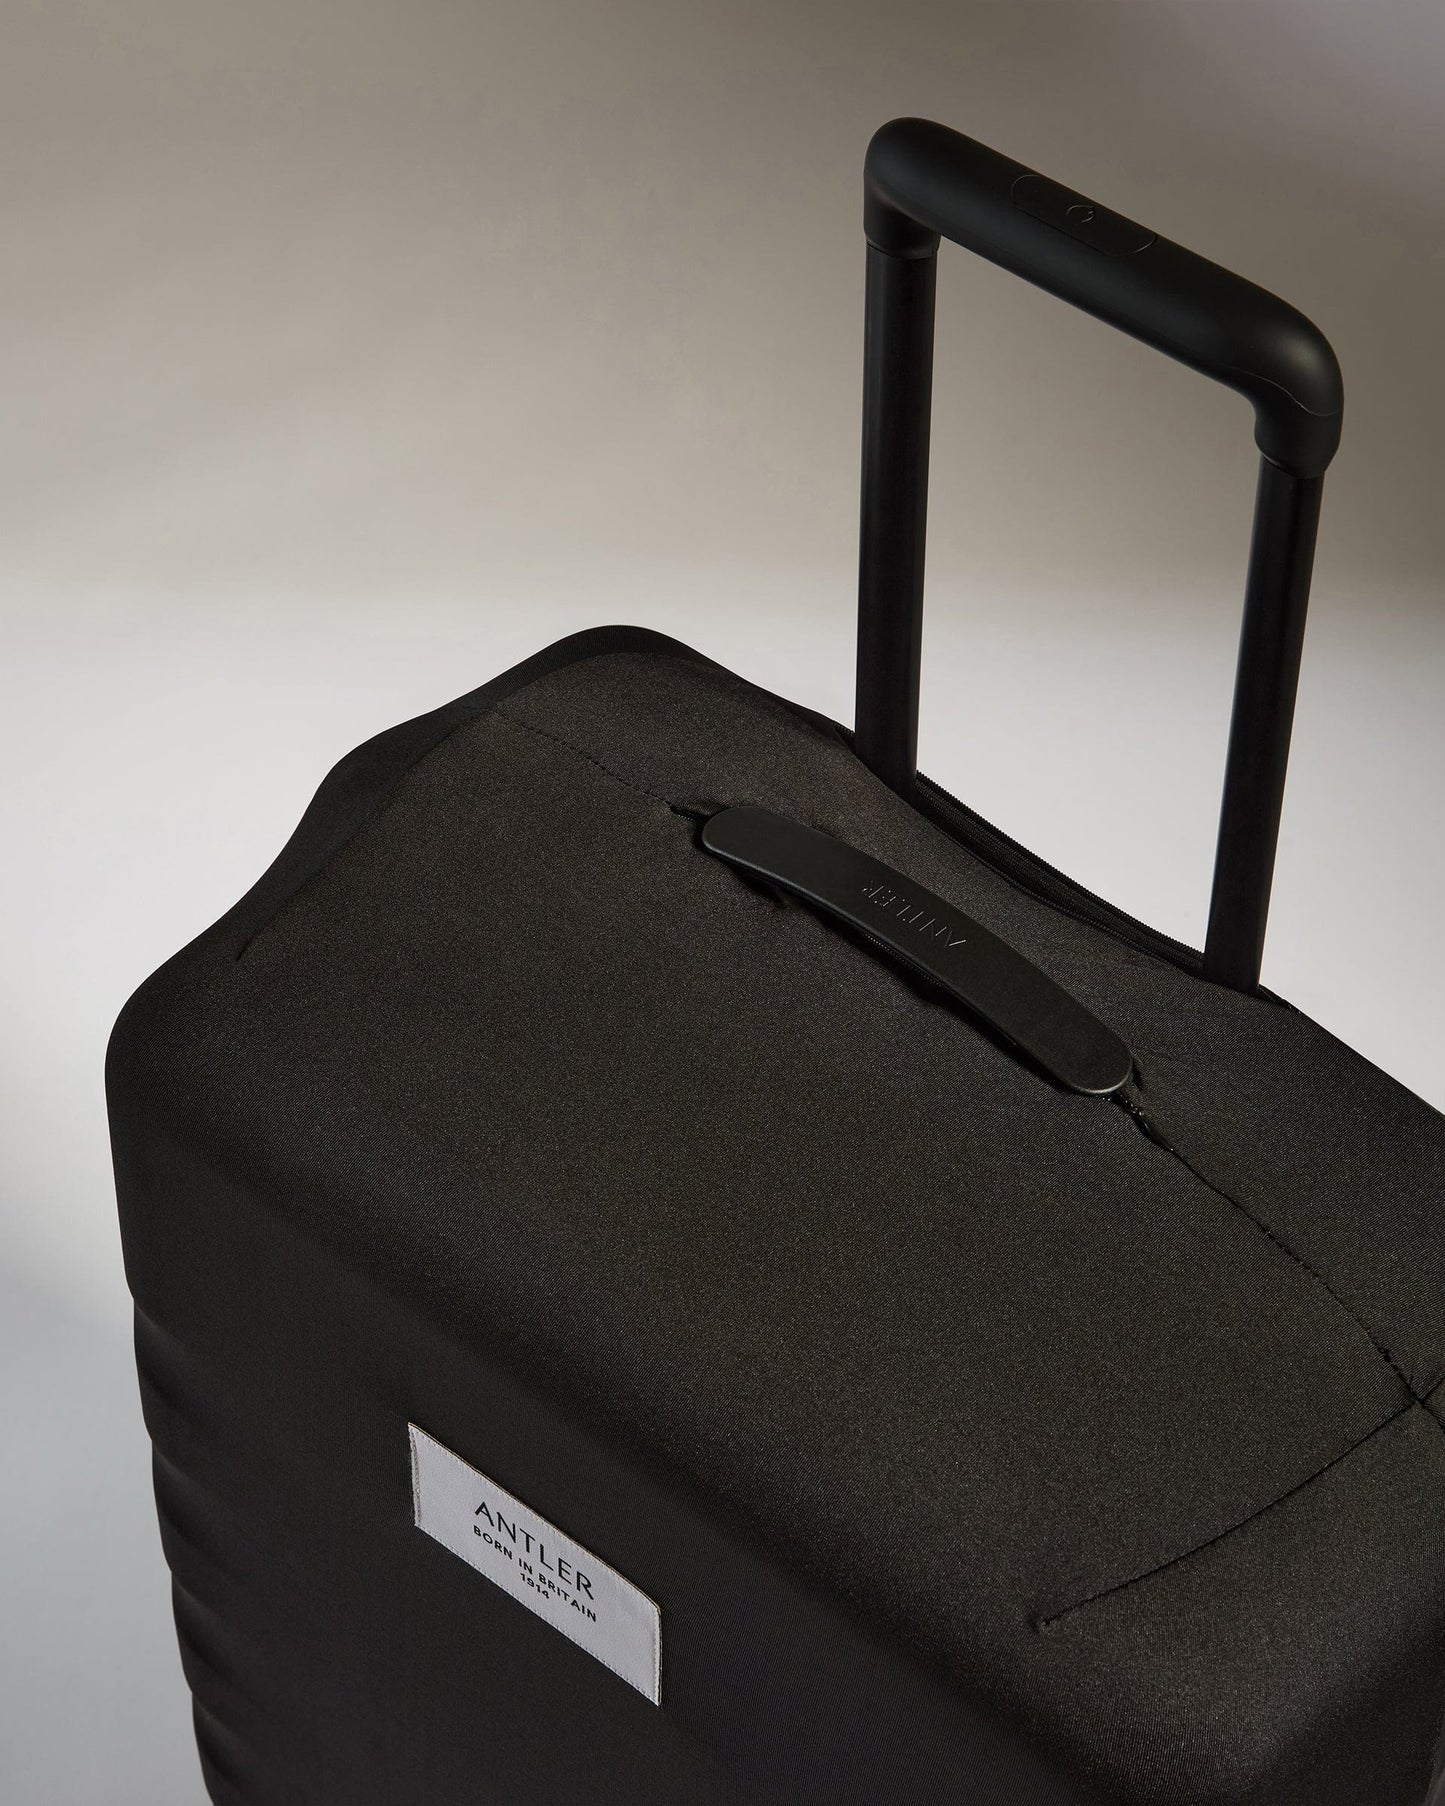 Antler Luggage -  Luggage Cover Medium in Black - Travel Accessories